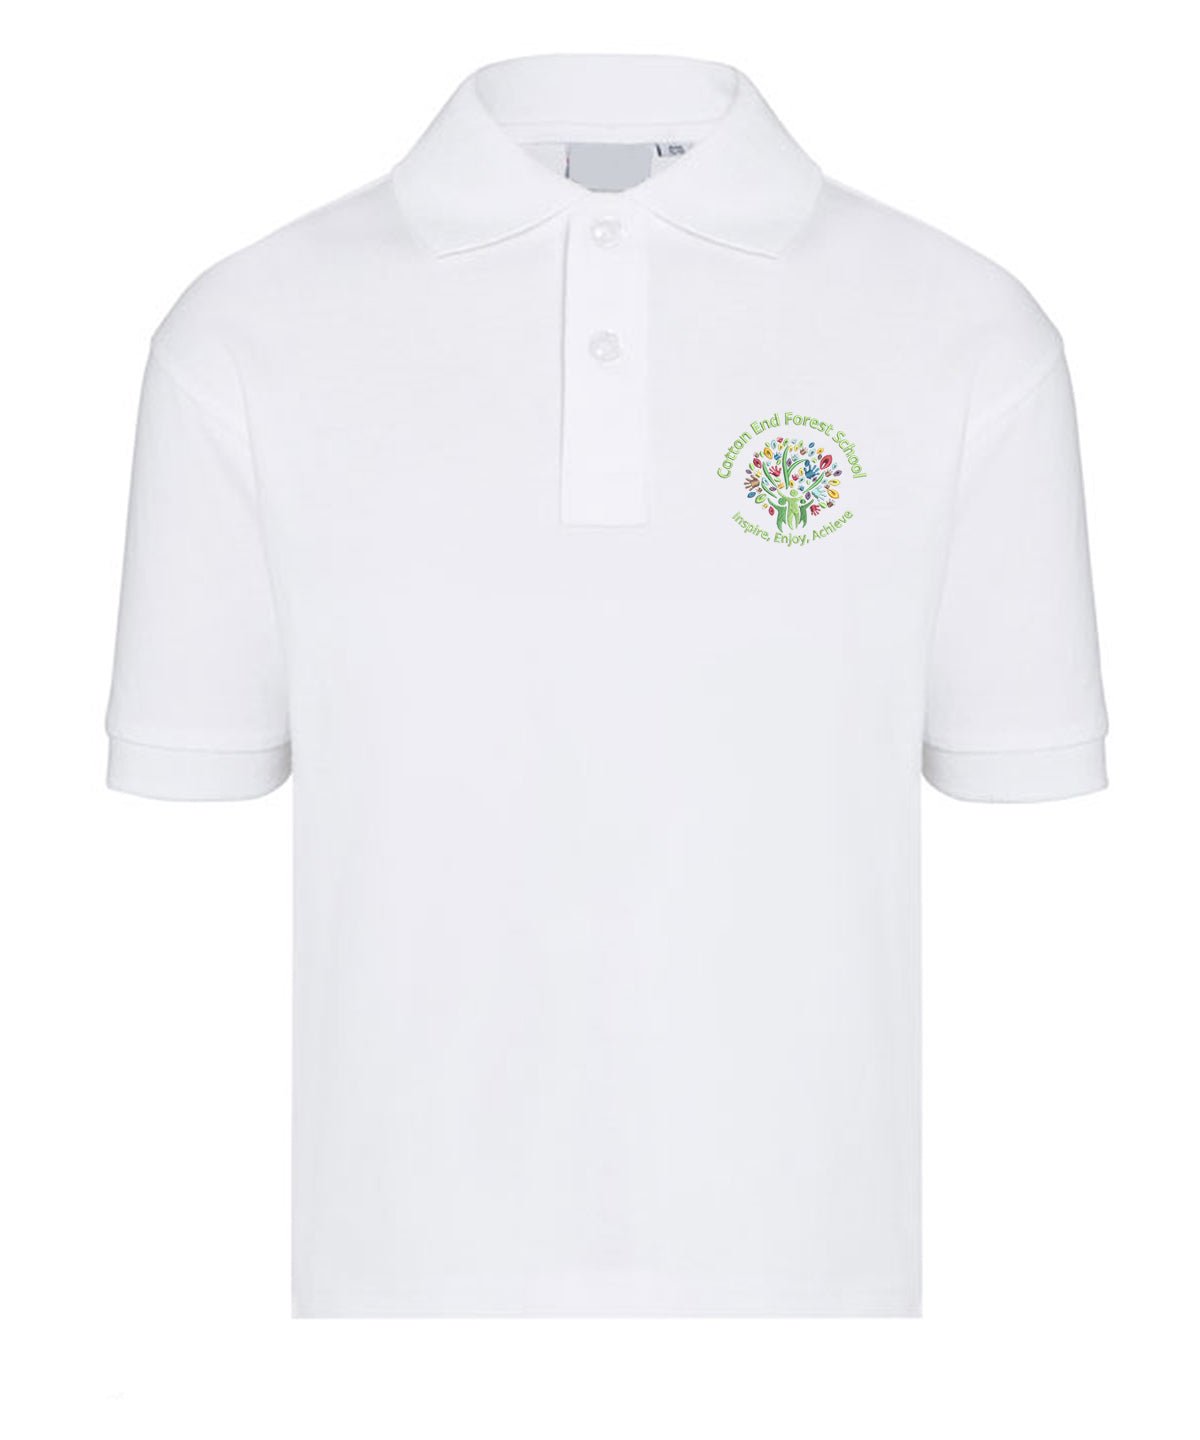 Cotton End Forest School - Polo Shirt